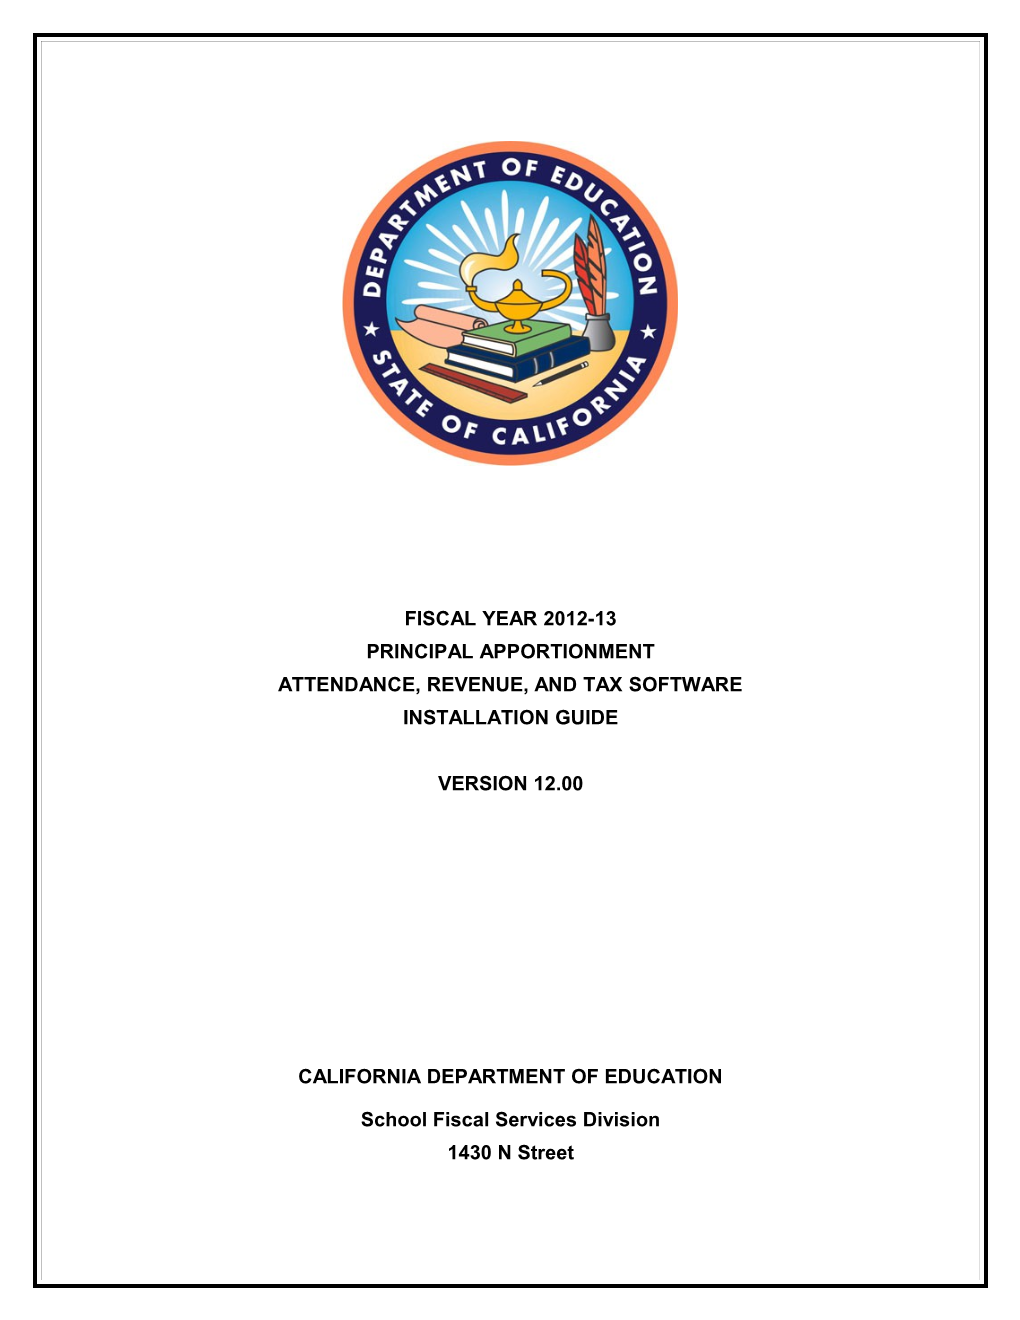 PA Software Install Guide, FY 2012-13 - Principal Apportionment (CA Dept of Education)